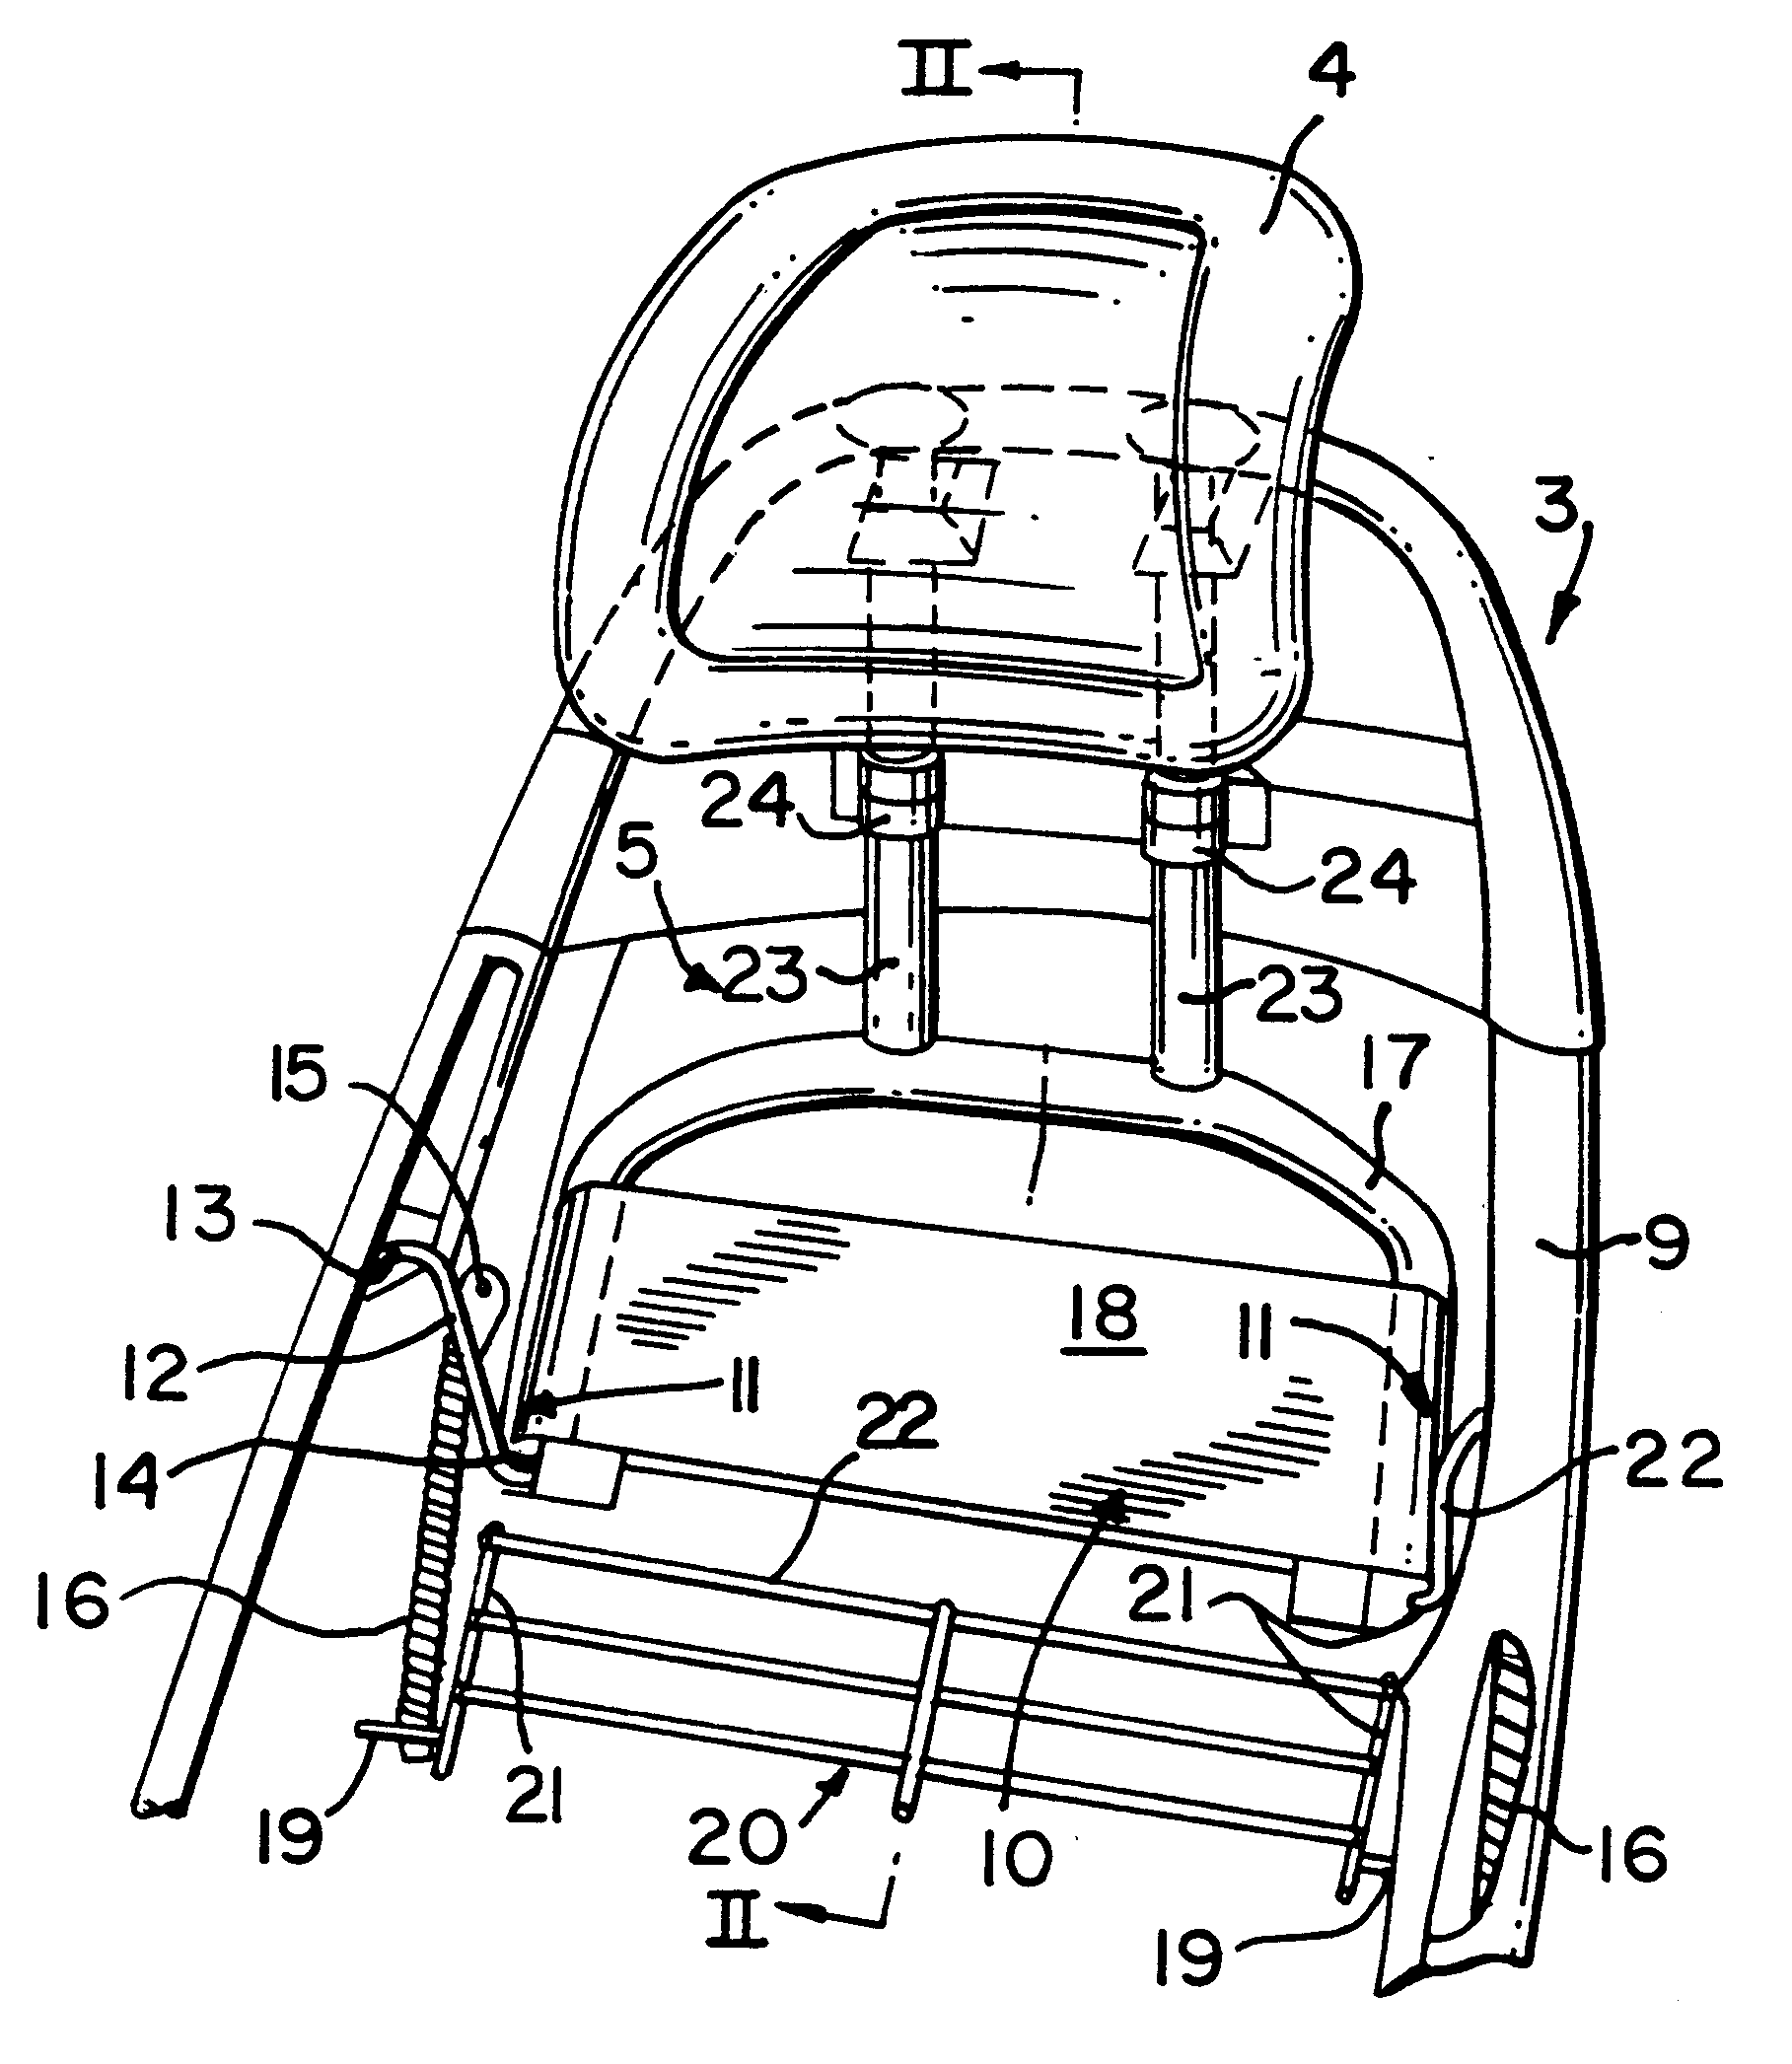 Vehicle seat provided with a headrest